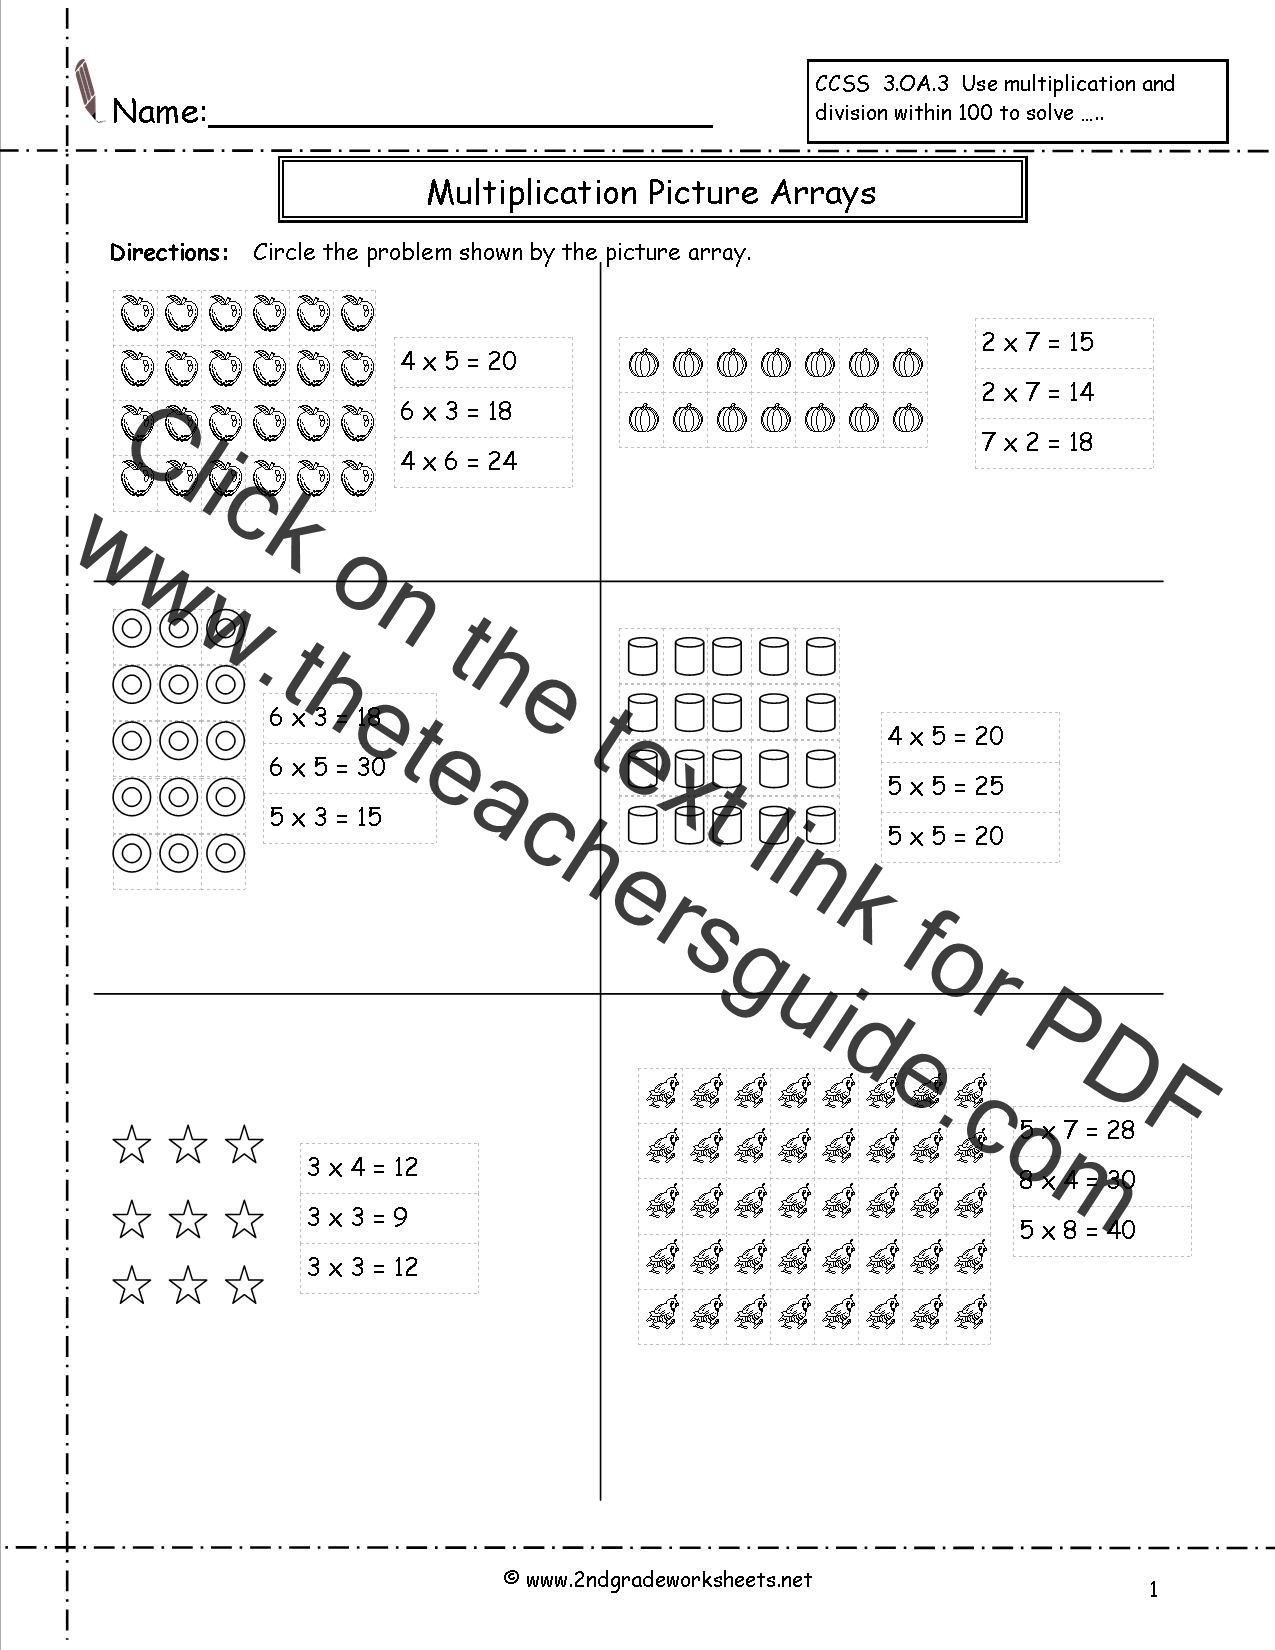 arrays-worksheets-3rd-grade-search-results-calendar-2015